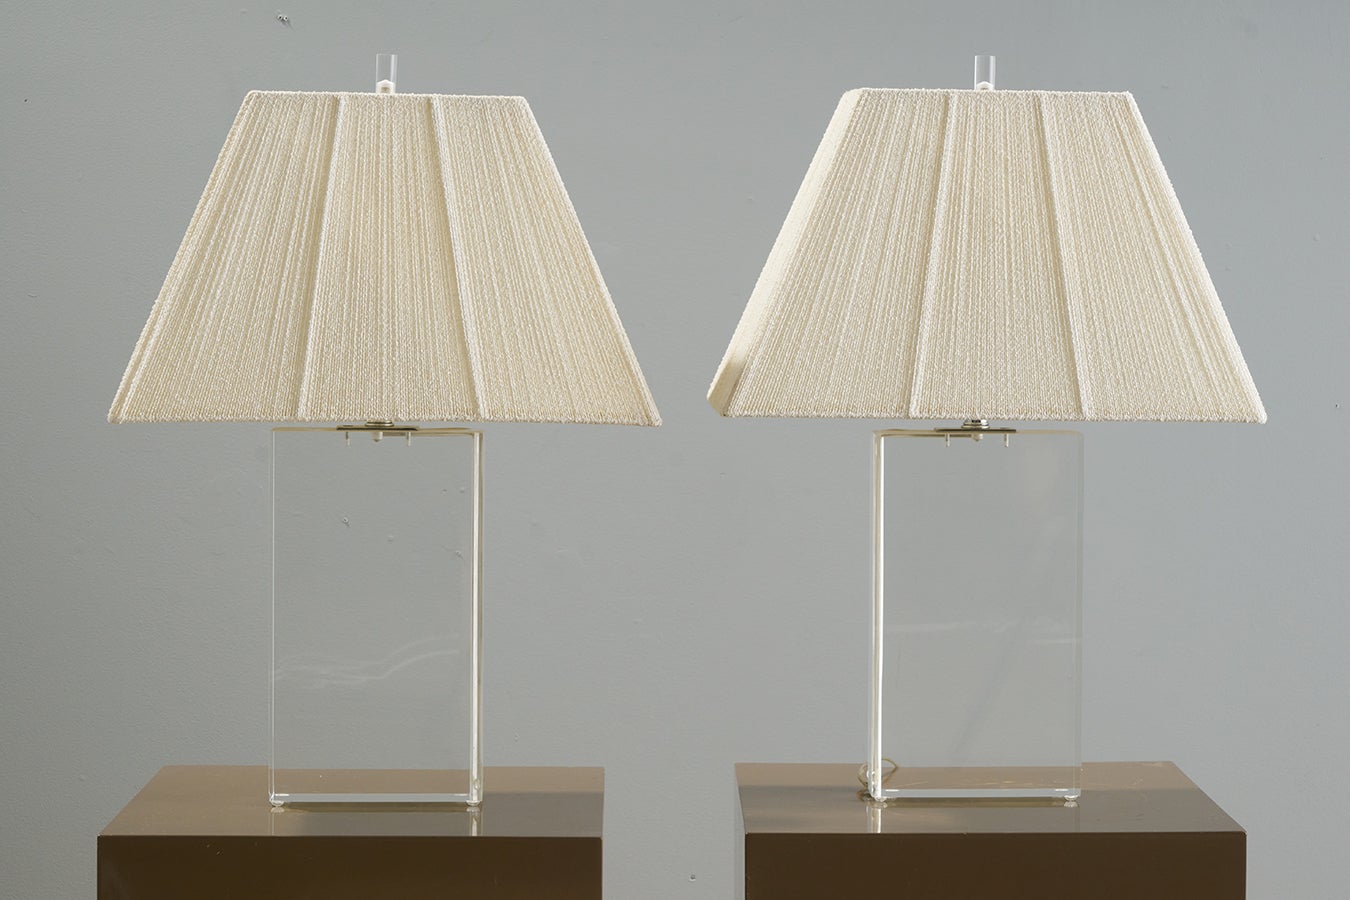 Fabulous and striking pair of vintage table lamps by renowned lamp manufacturer Lang Levin. Features an all clear acrylic (or lucite) body with a unique slot for the cord running along the side of an angled corner. Chrome hardware on top and